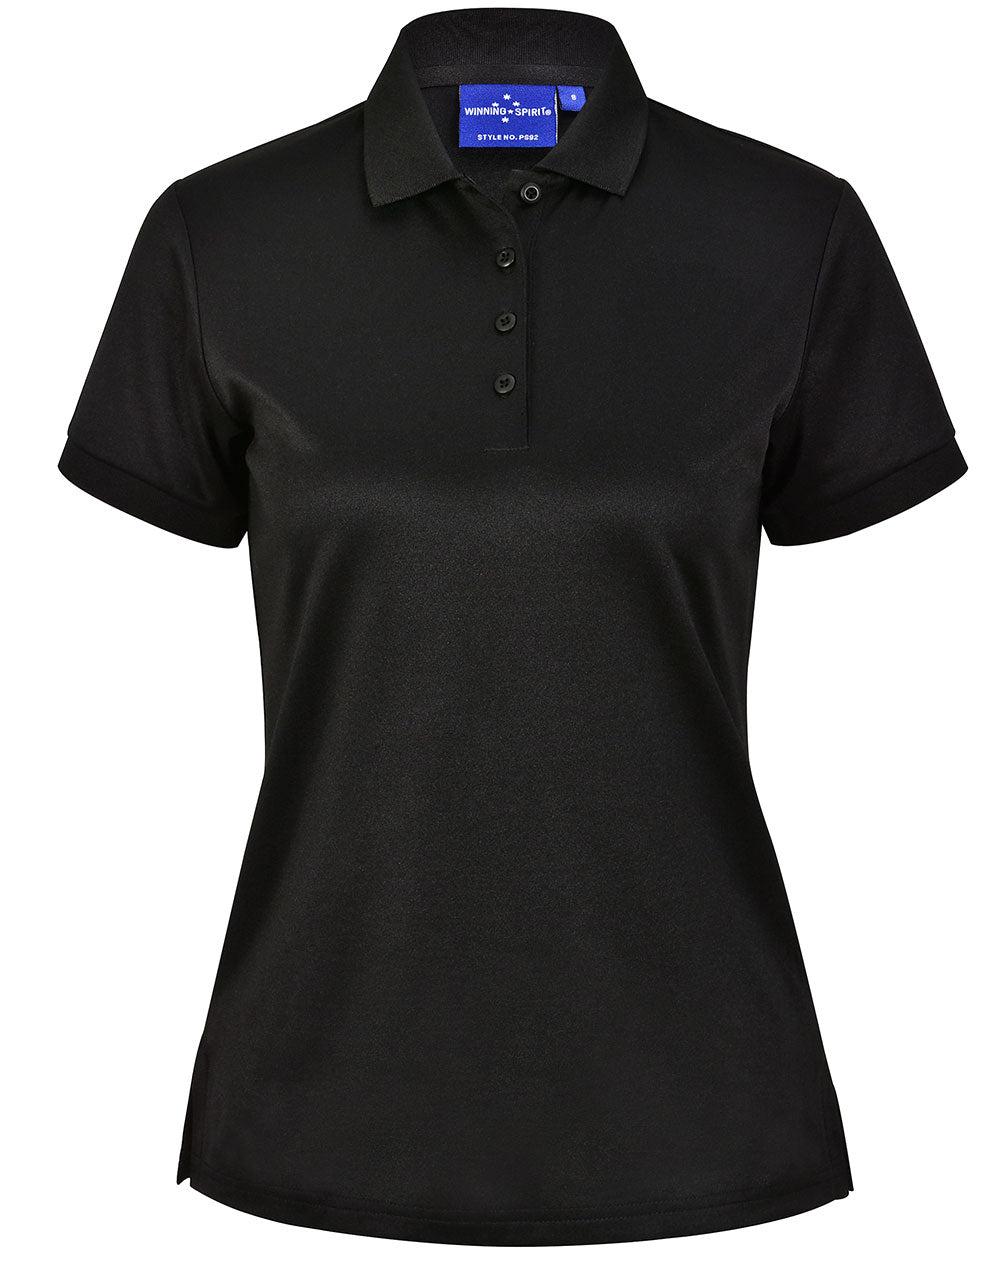 Winning Spirit Ladie's Sustainable Poly/Cotton Corporate Polo PS92 Casual Wear Winning Spirit Black 8 